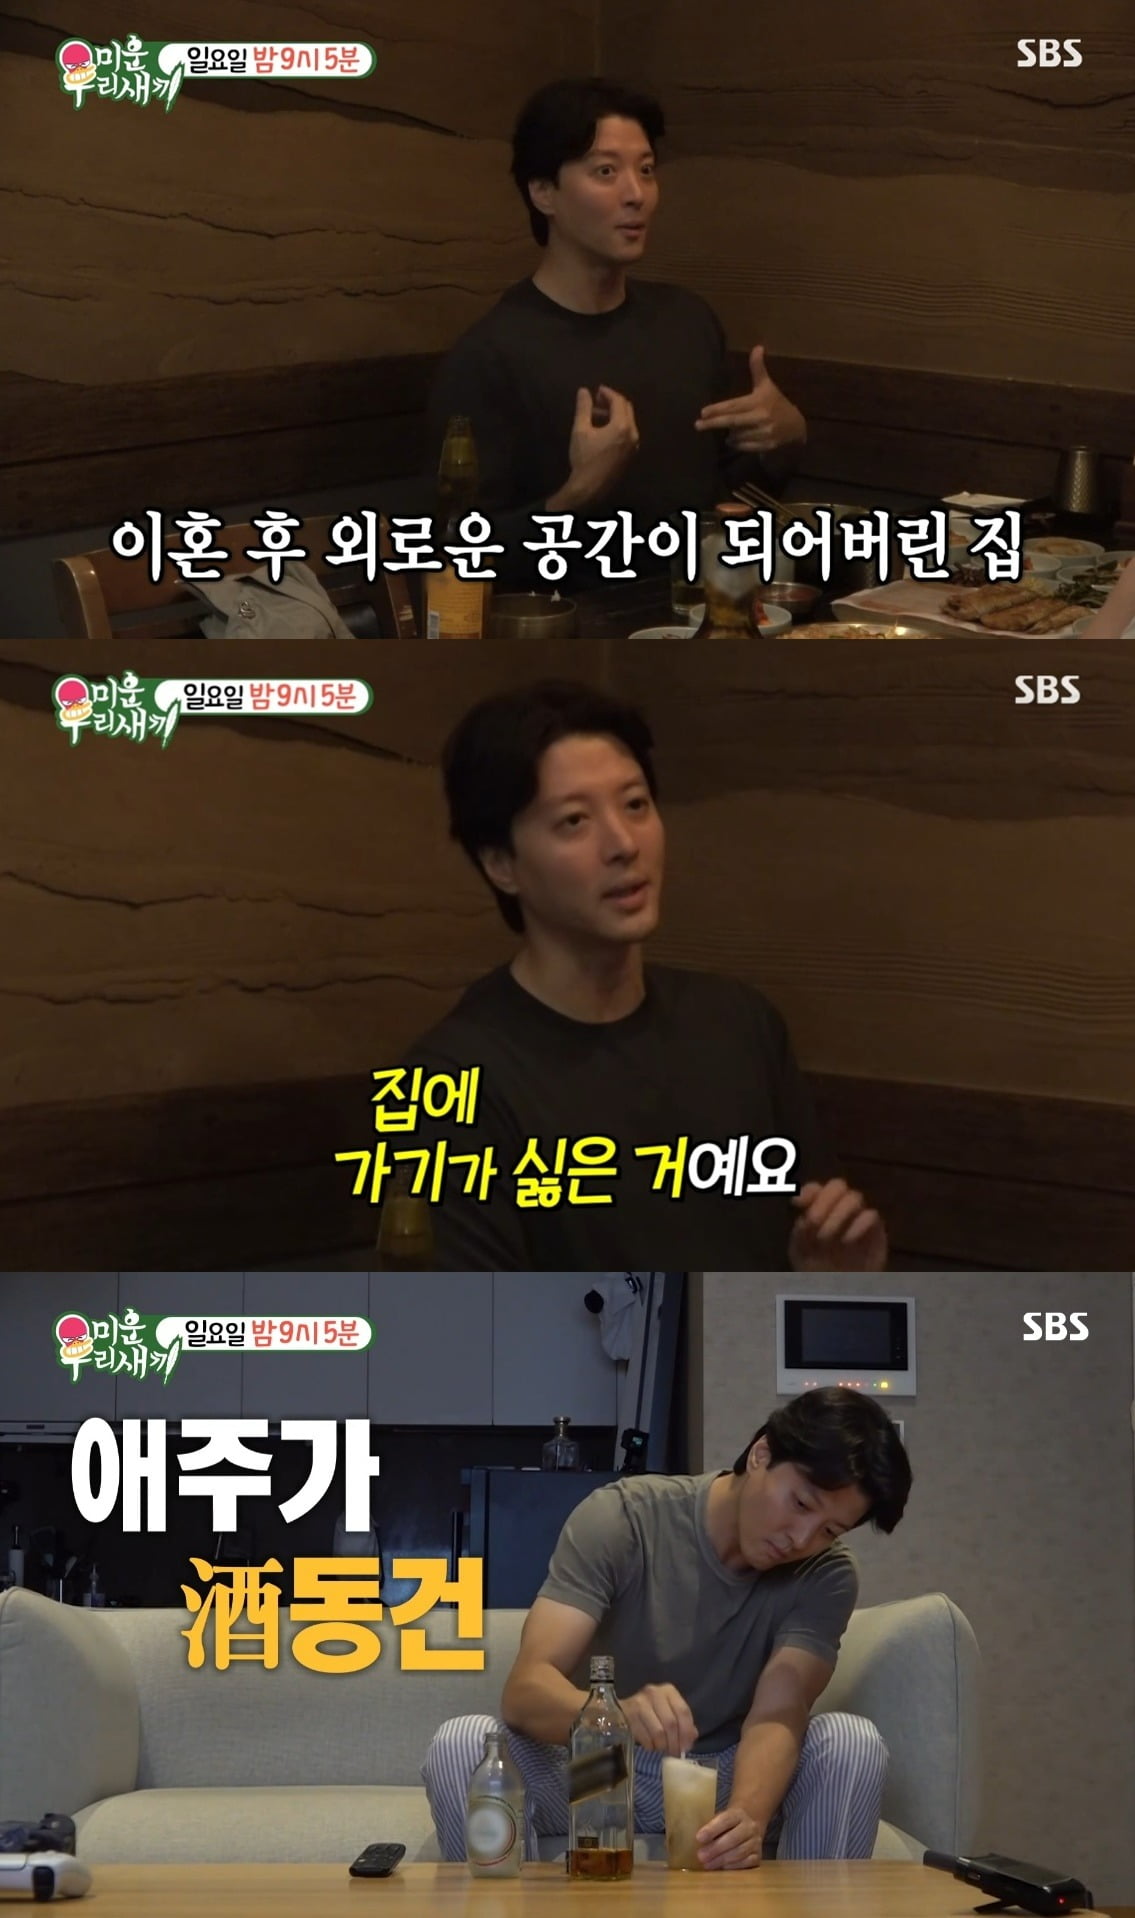 "I don't want to go home after divorce" Lee Dong-gun, 'crying' on the phone with his 7-year-old daughter Roa